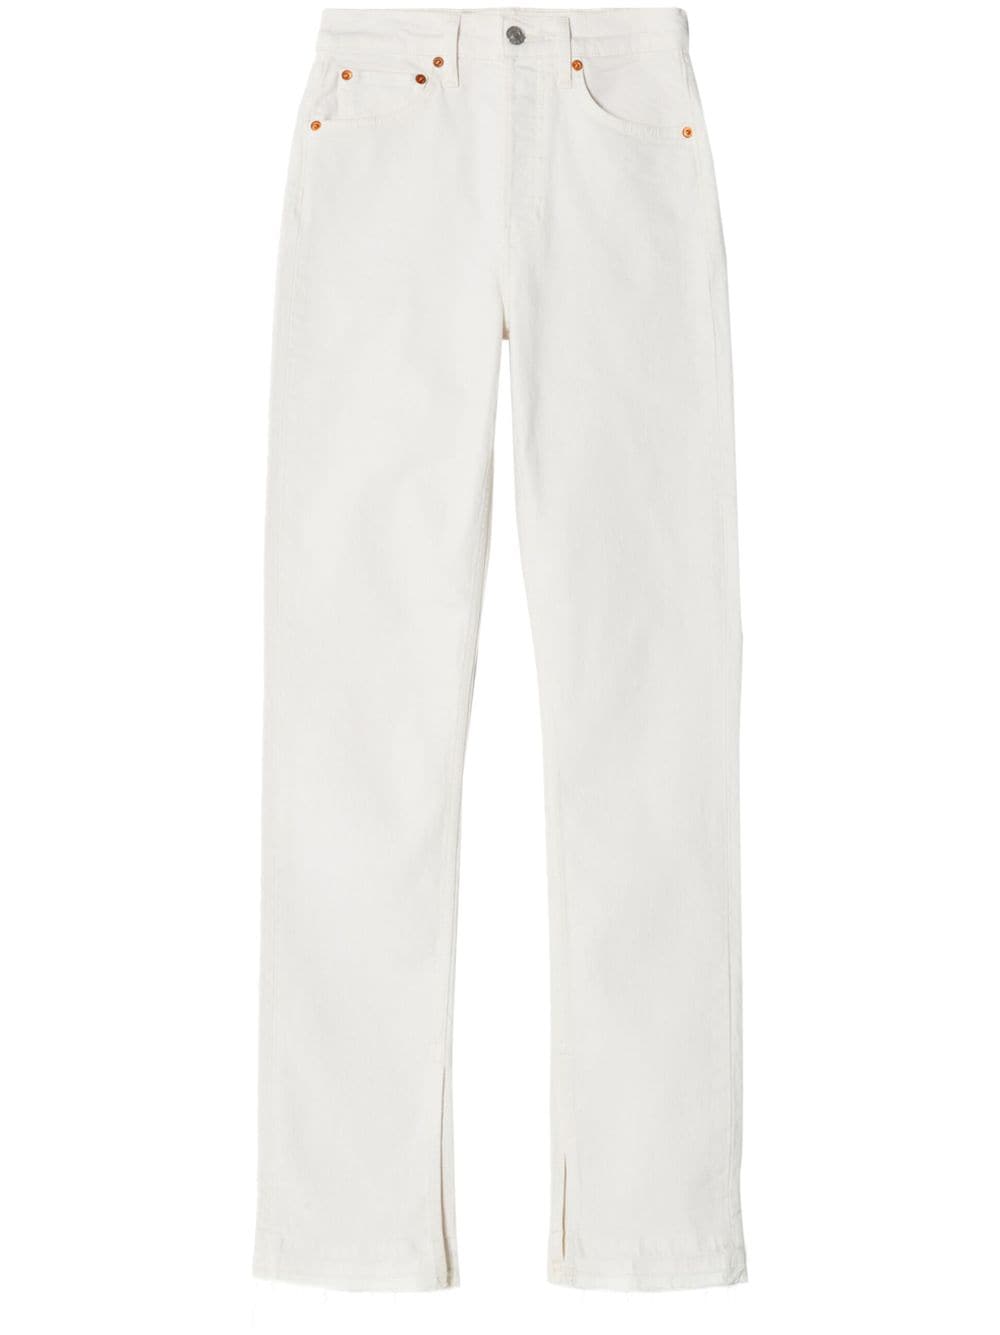 RE/DONE high-rise skinny boot jeans - White von RE/DONE